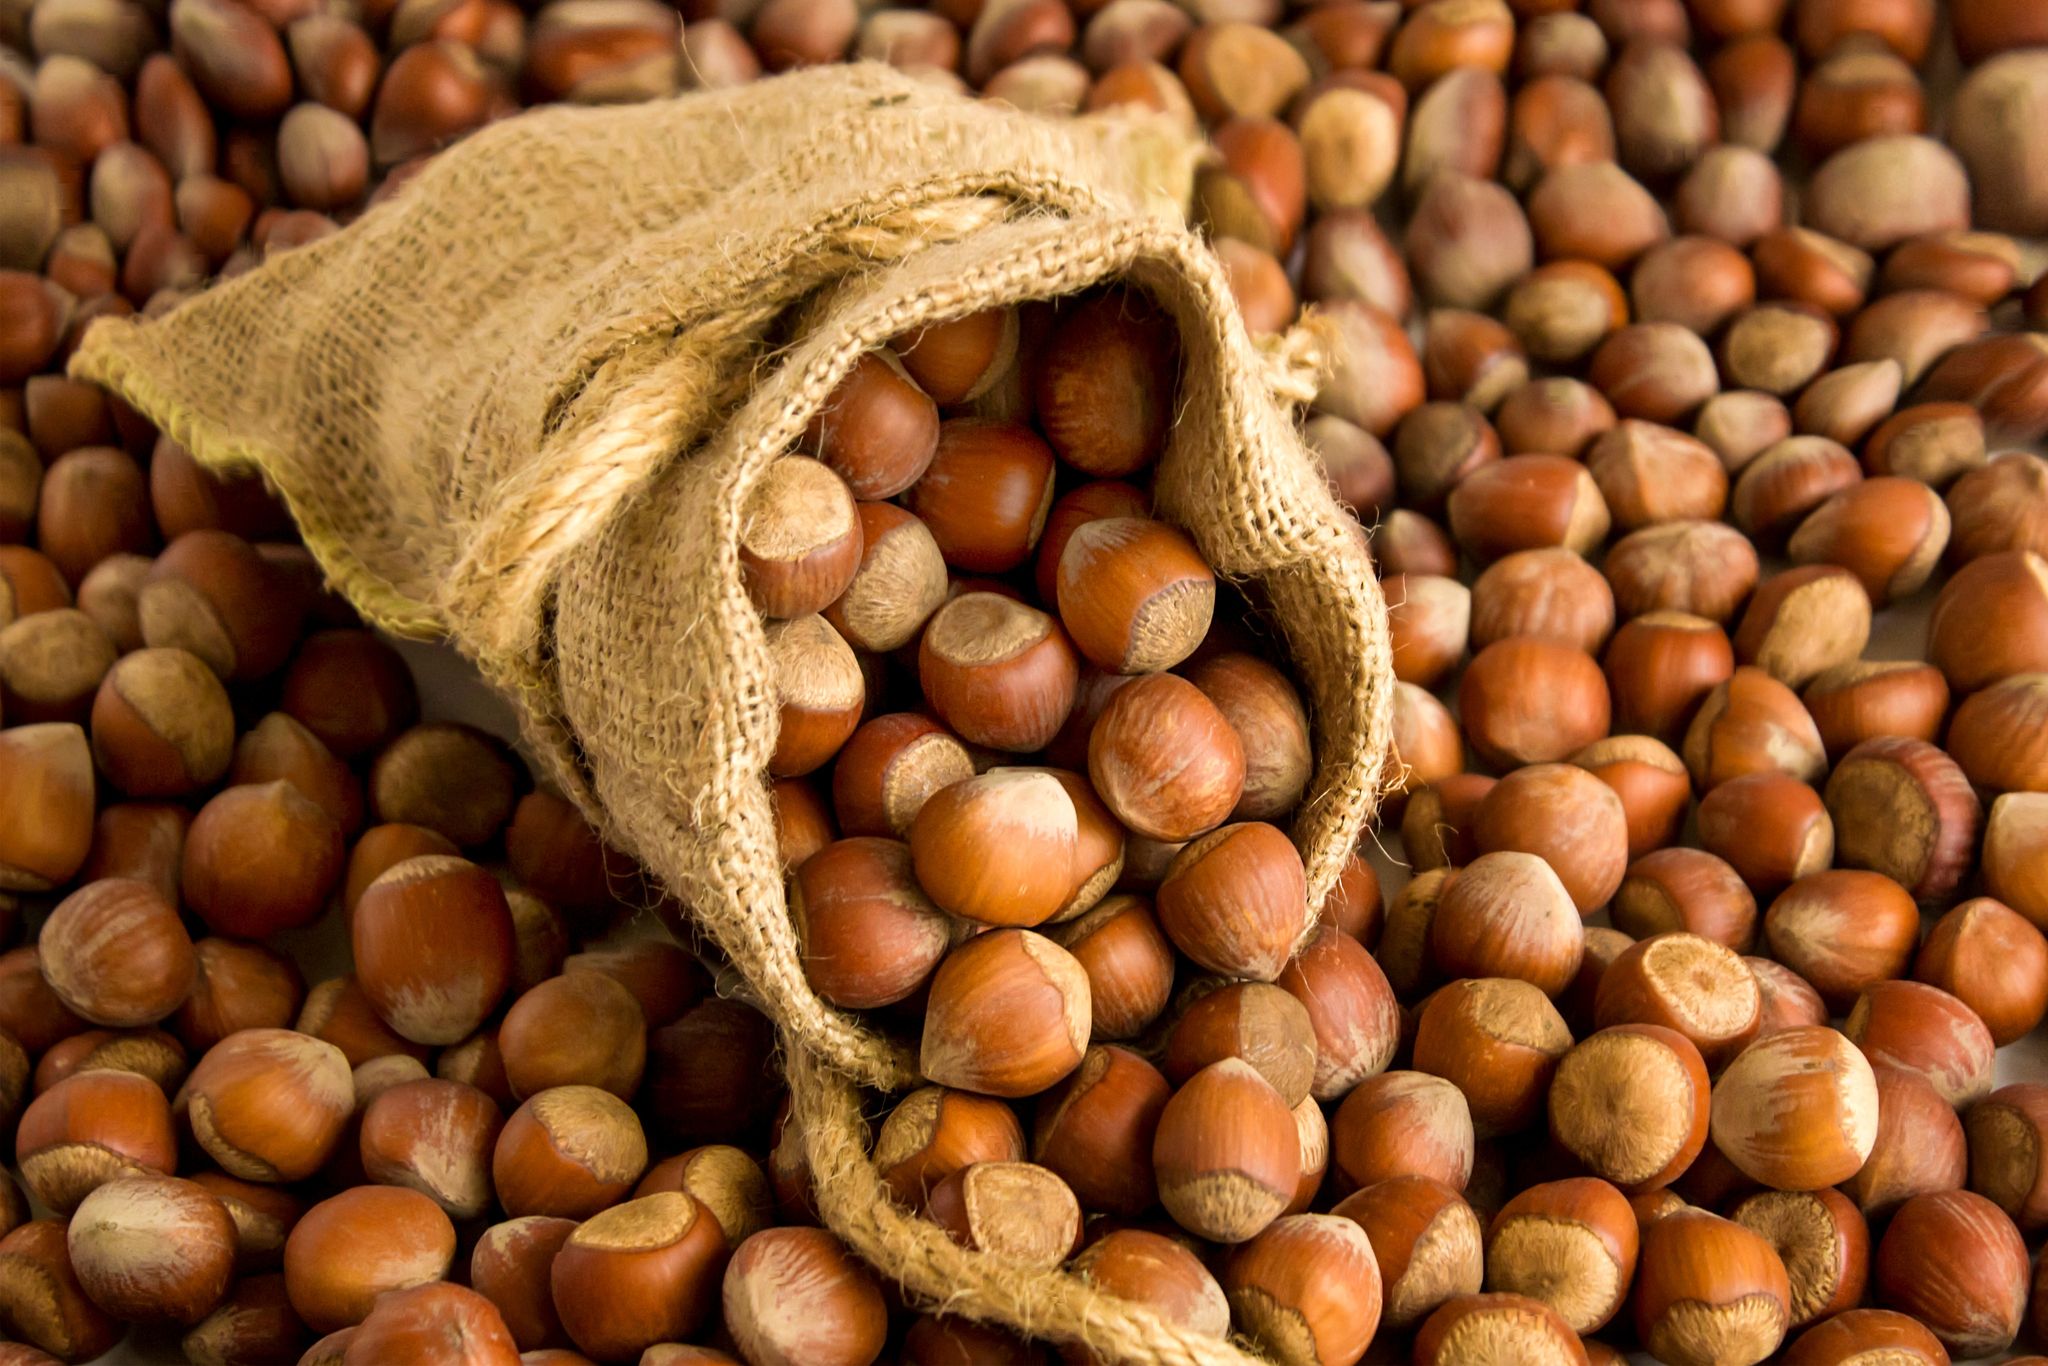 The European Commission positively assessed the state system of aflatoxin control in Georgian nuts